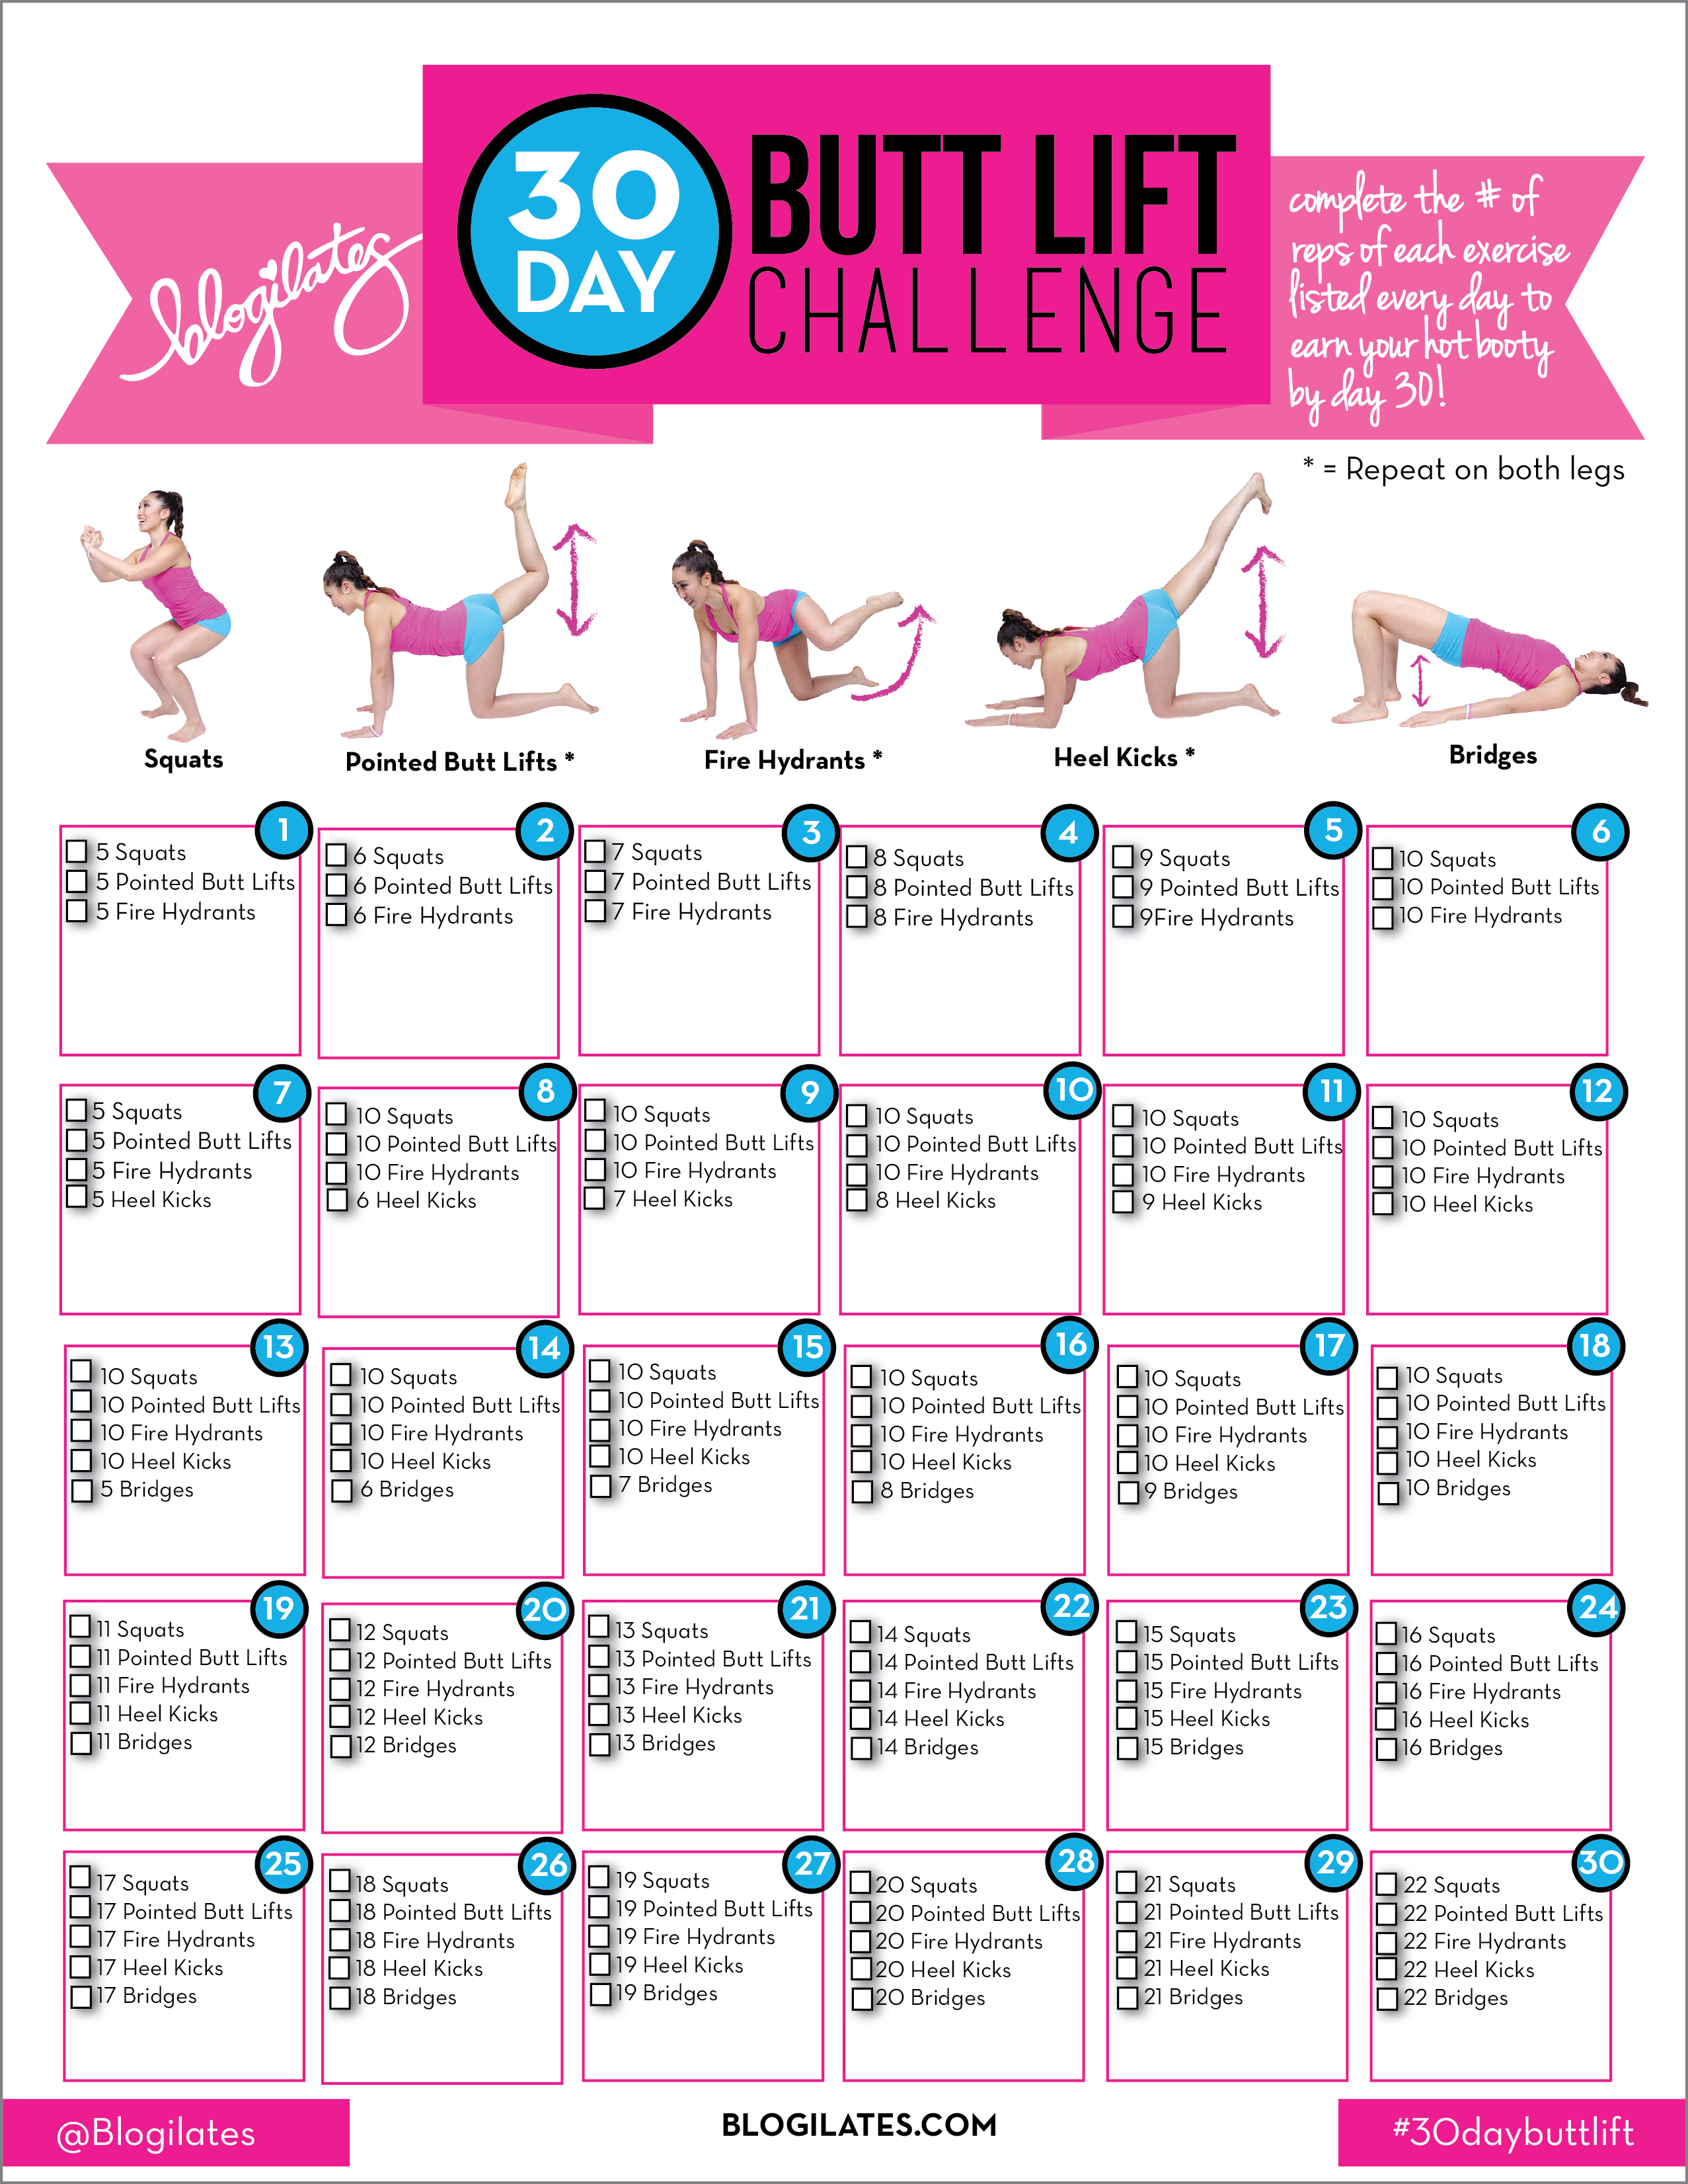 30 Day Butt Lift Challenge – Bunny and Lin, are you in? It will help get my mind off the stressful things!